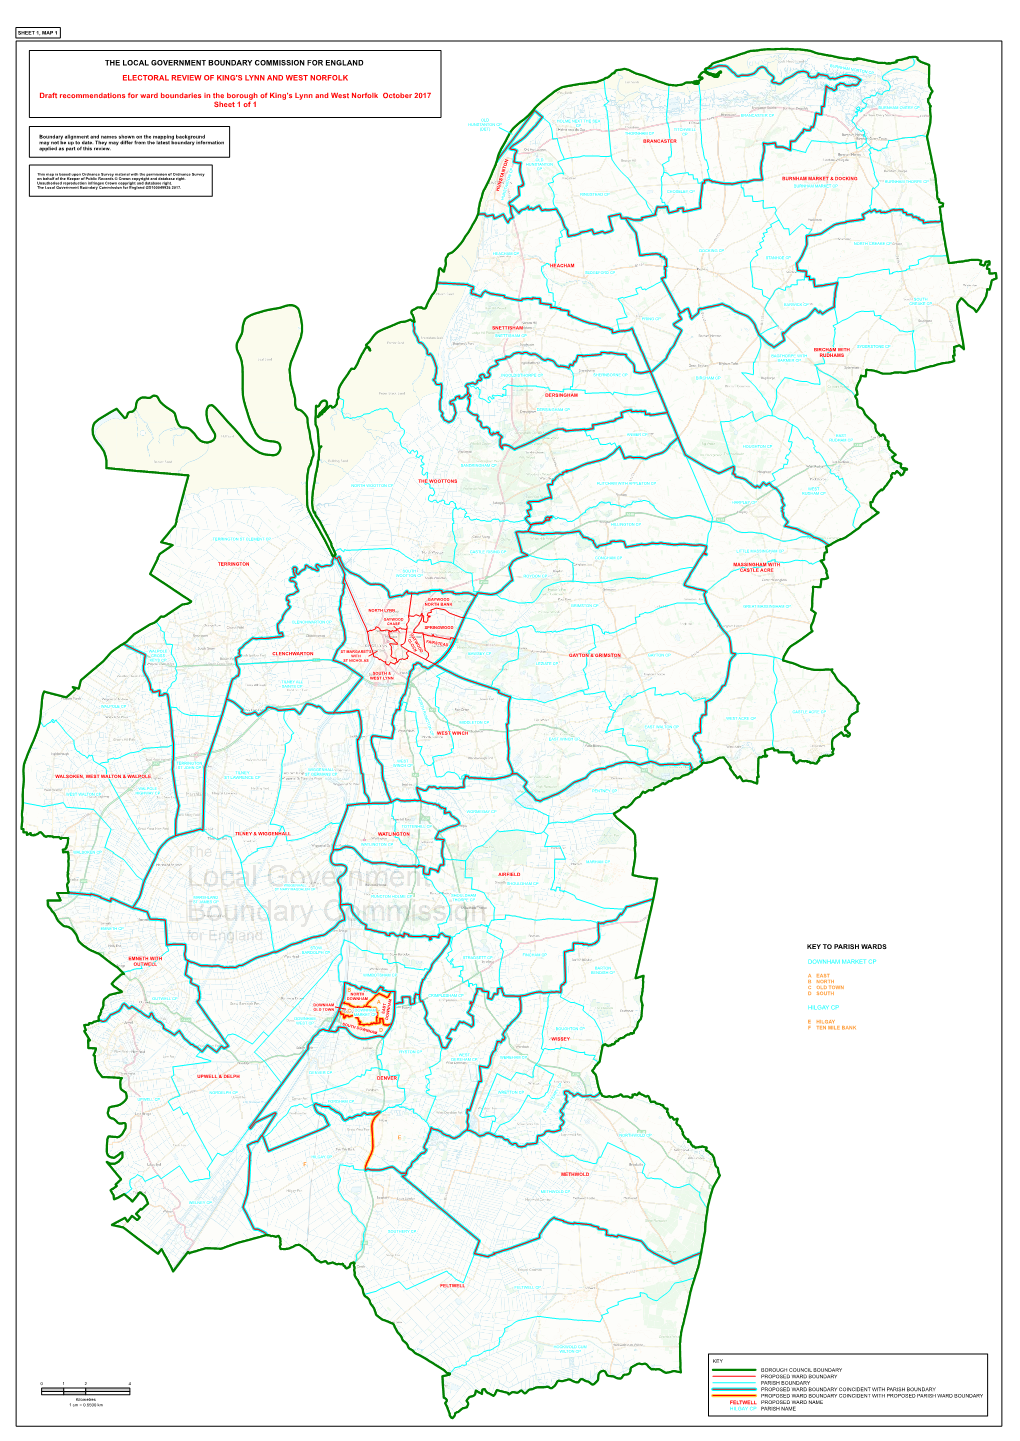 The Local Government Boundary Commission for England Bur Nham Nort on Cp Electoral Review of King's Lynn and West Norfolk